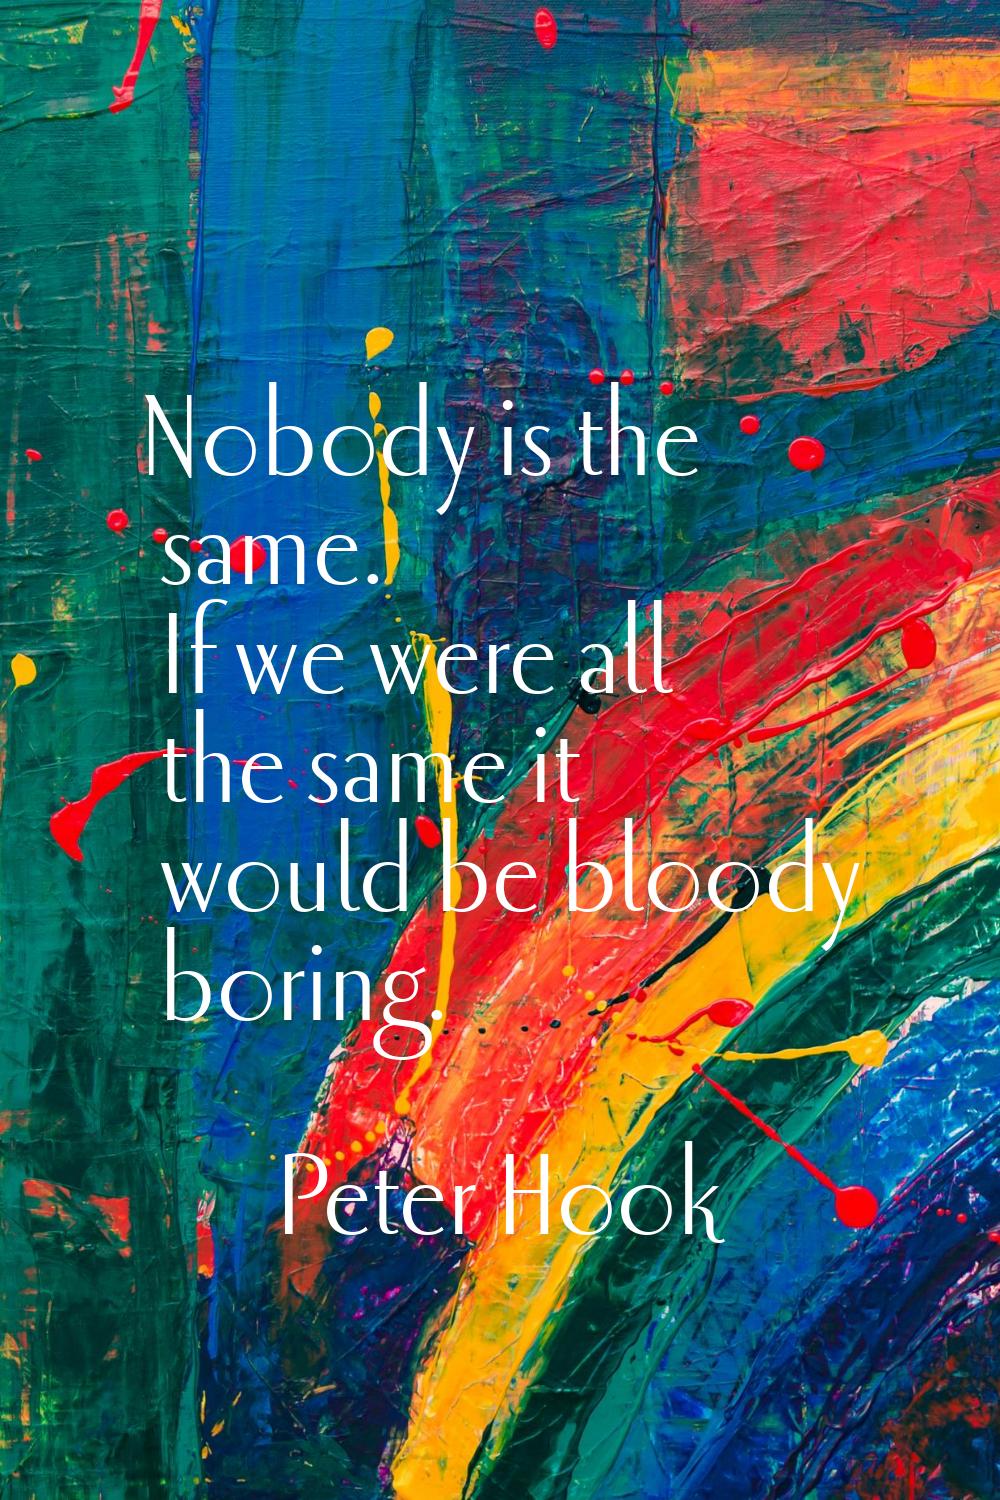 Nobody is the same. If we were all the same it would be bloody boring.